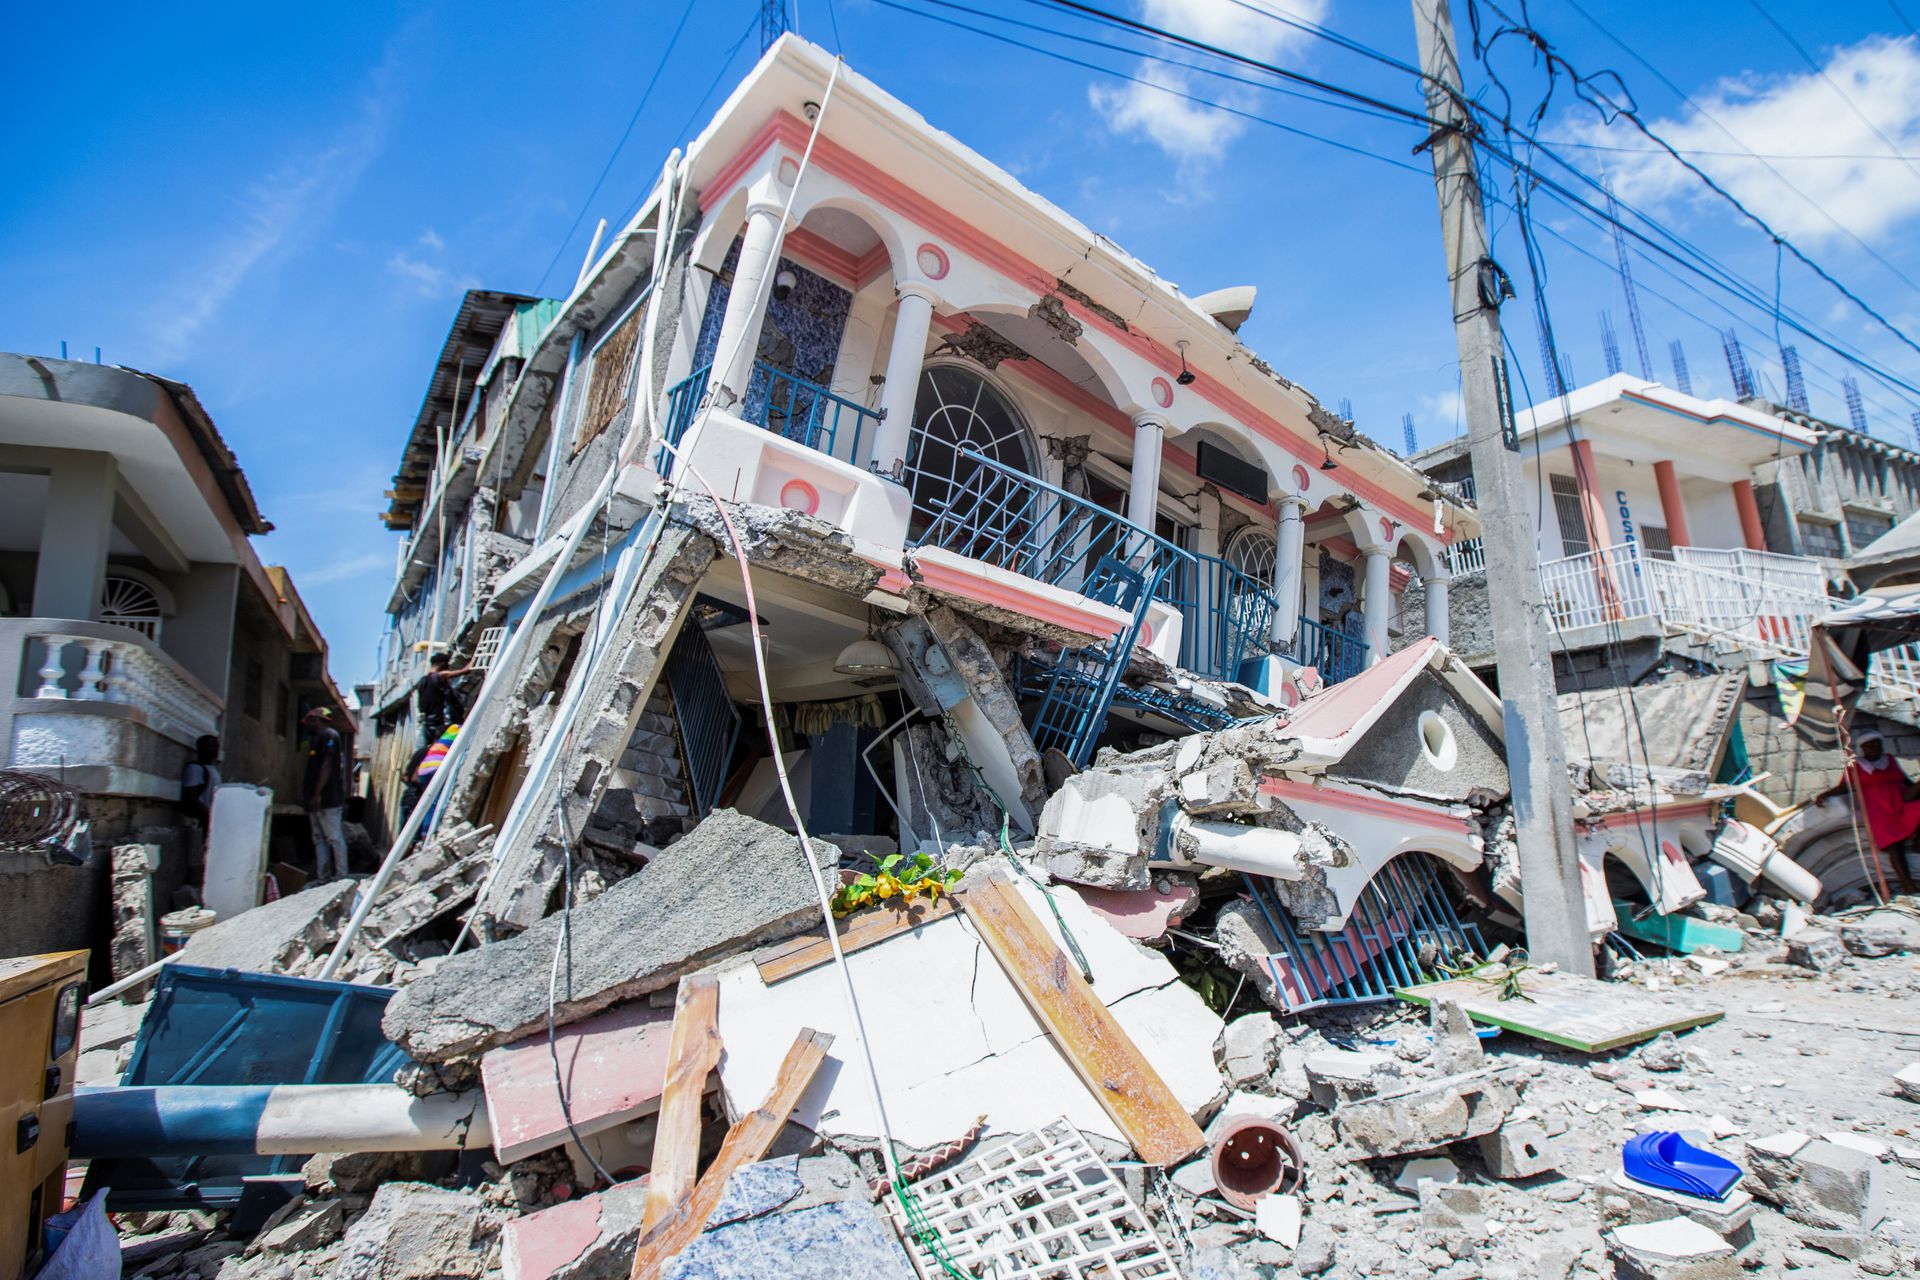 A view shows houses destroyed following a 7.2 magnitude earthquake in Les Cayes, Haiti August 14, 2021. Photo: Reuters